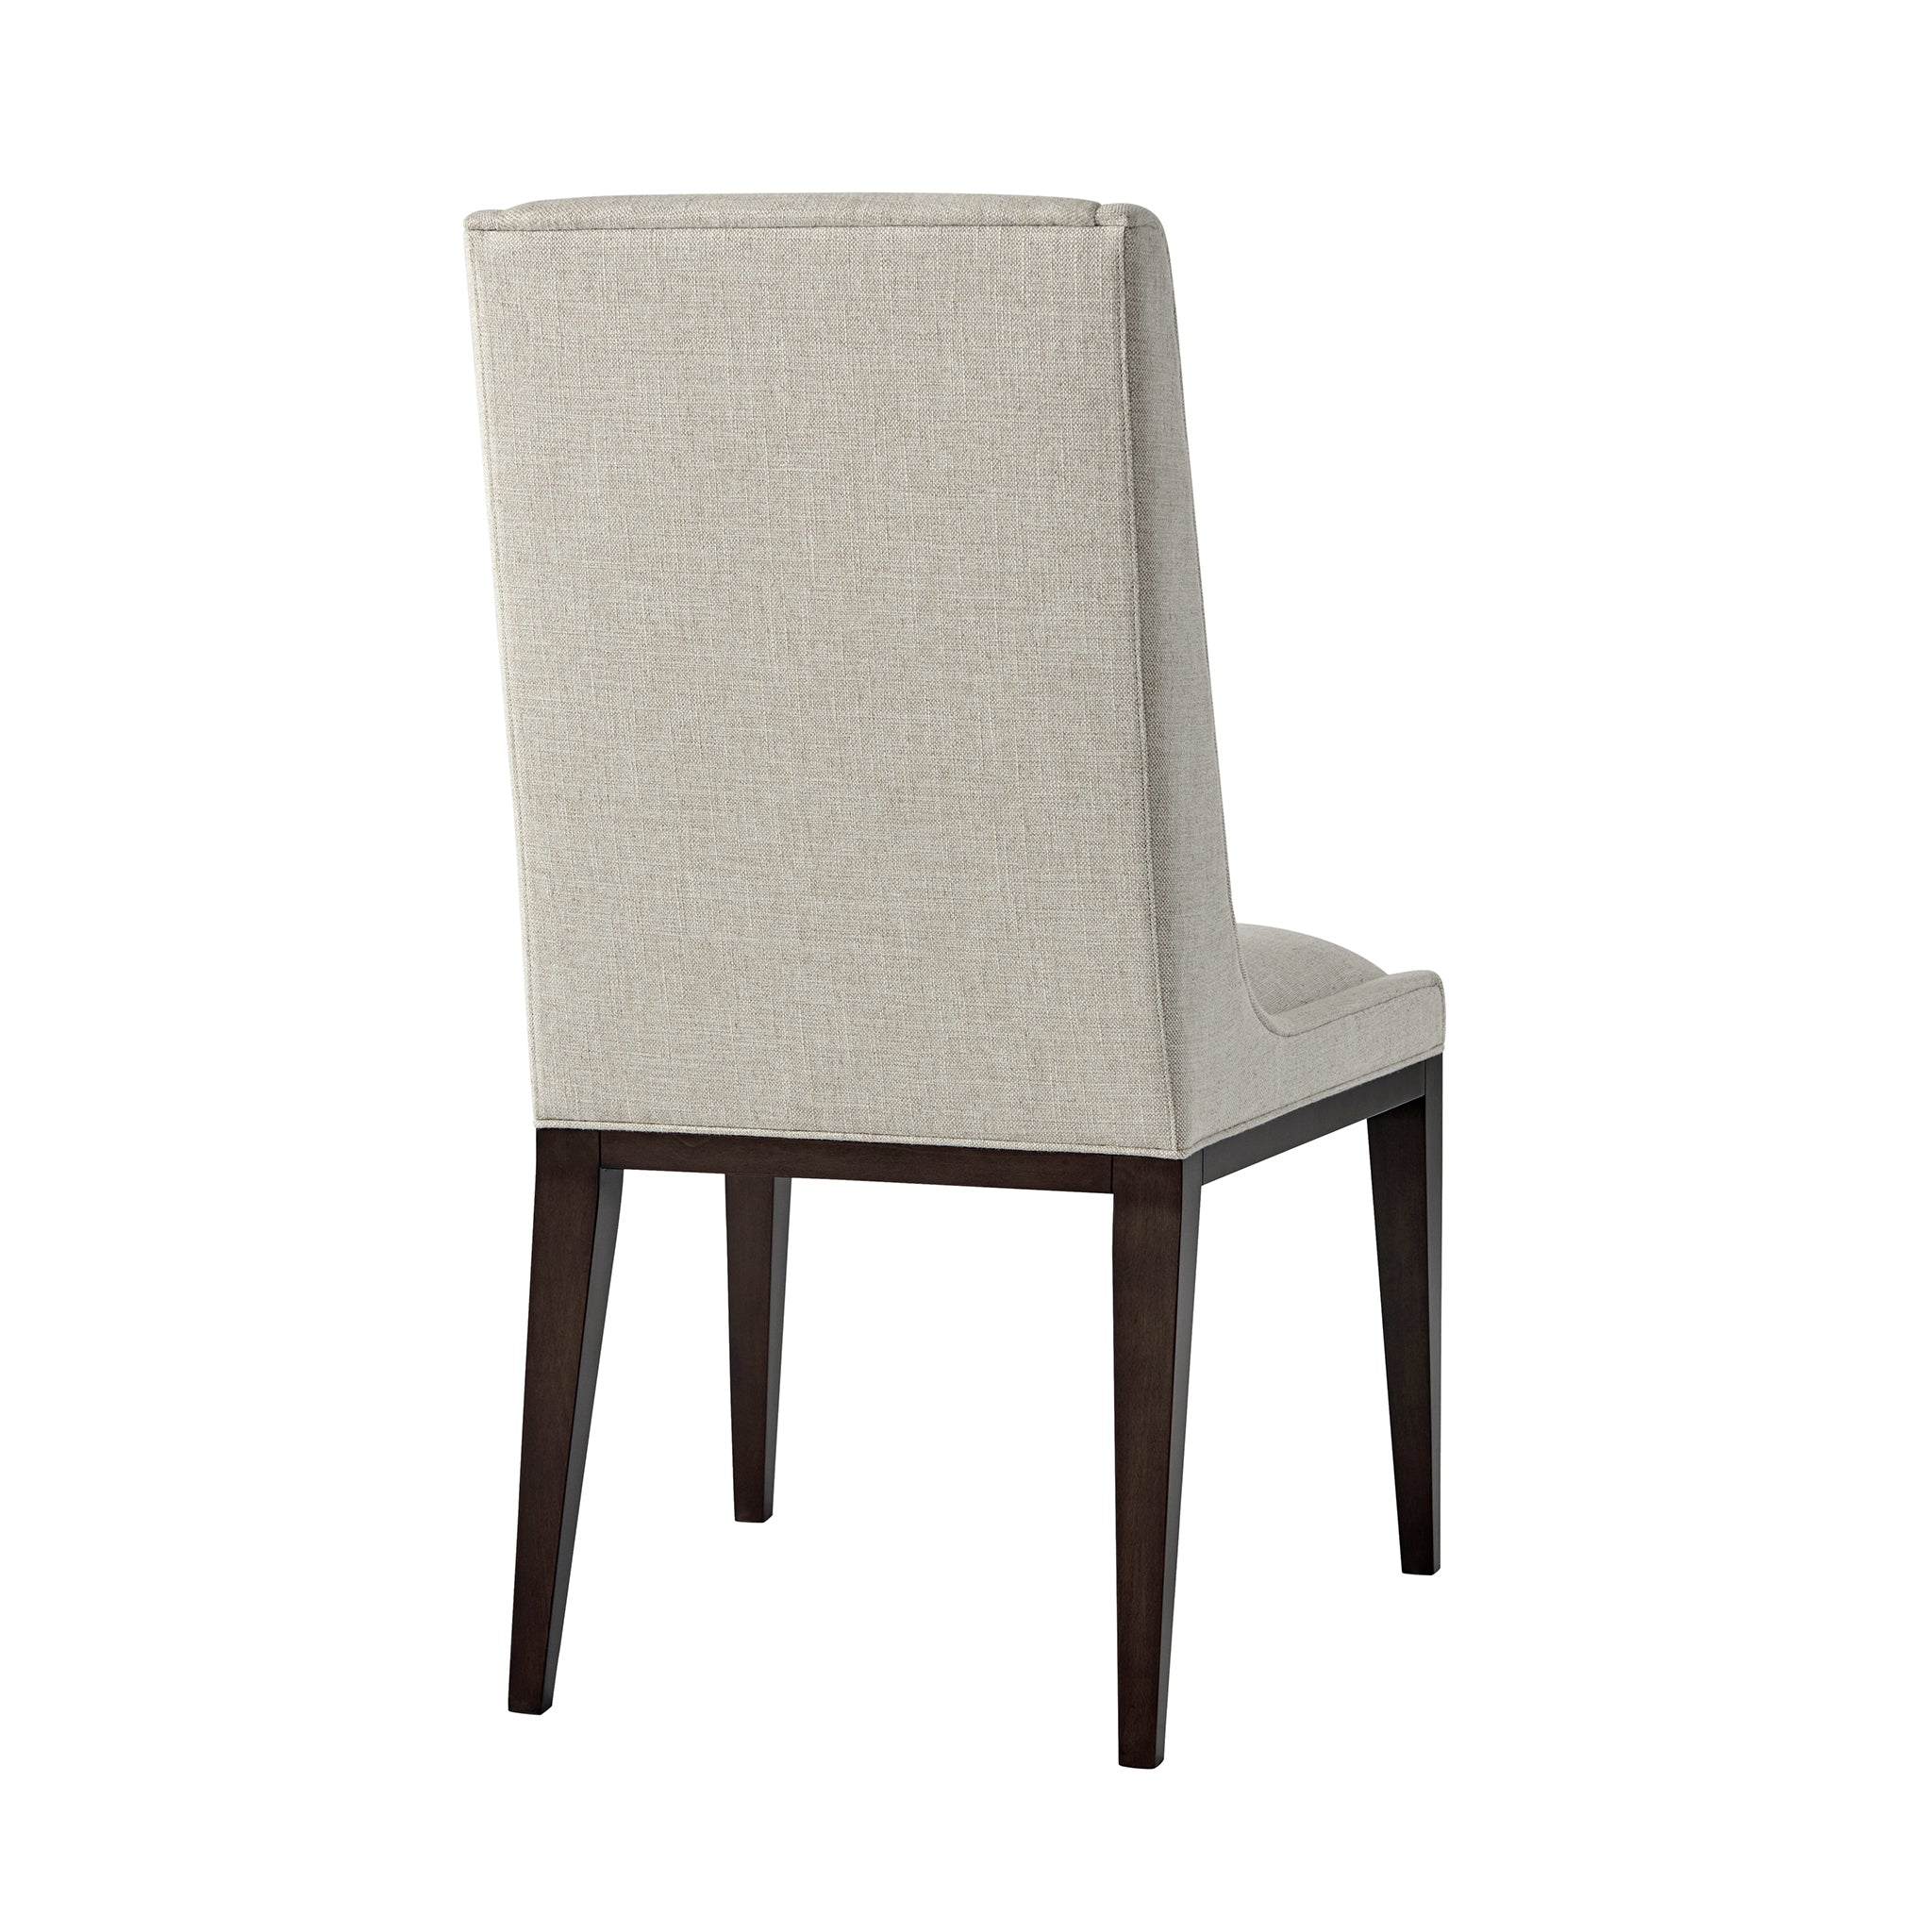 theodore alexander dorian dining chairset of 10 pcs dining chairs 